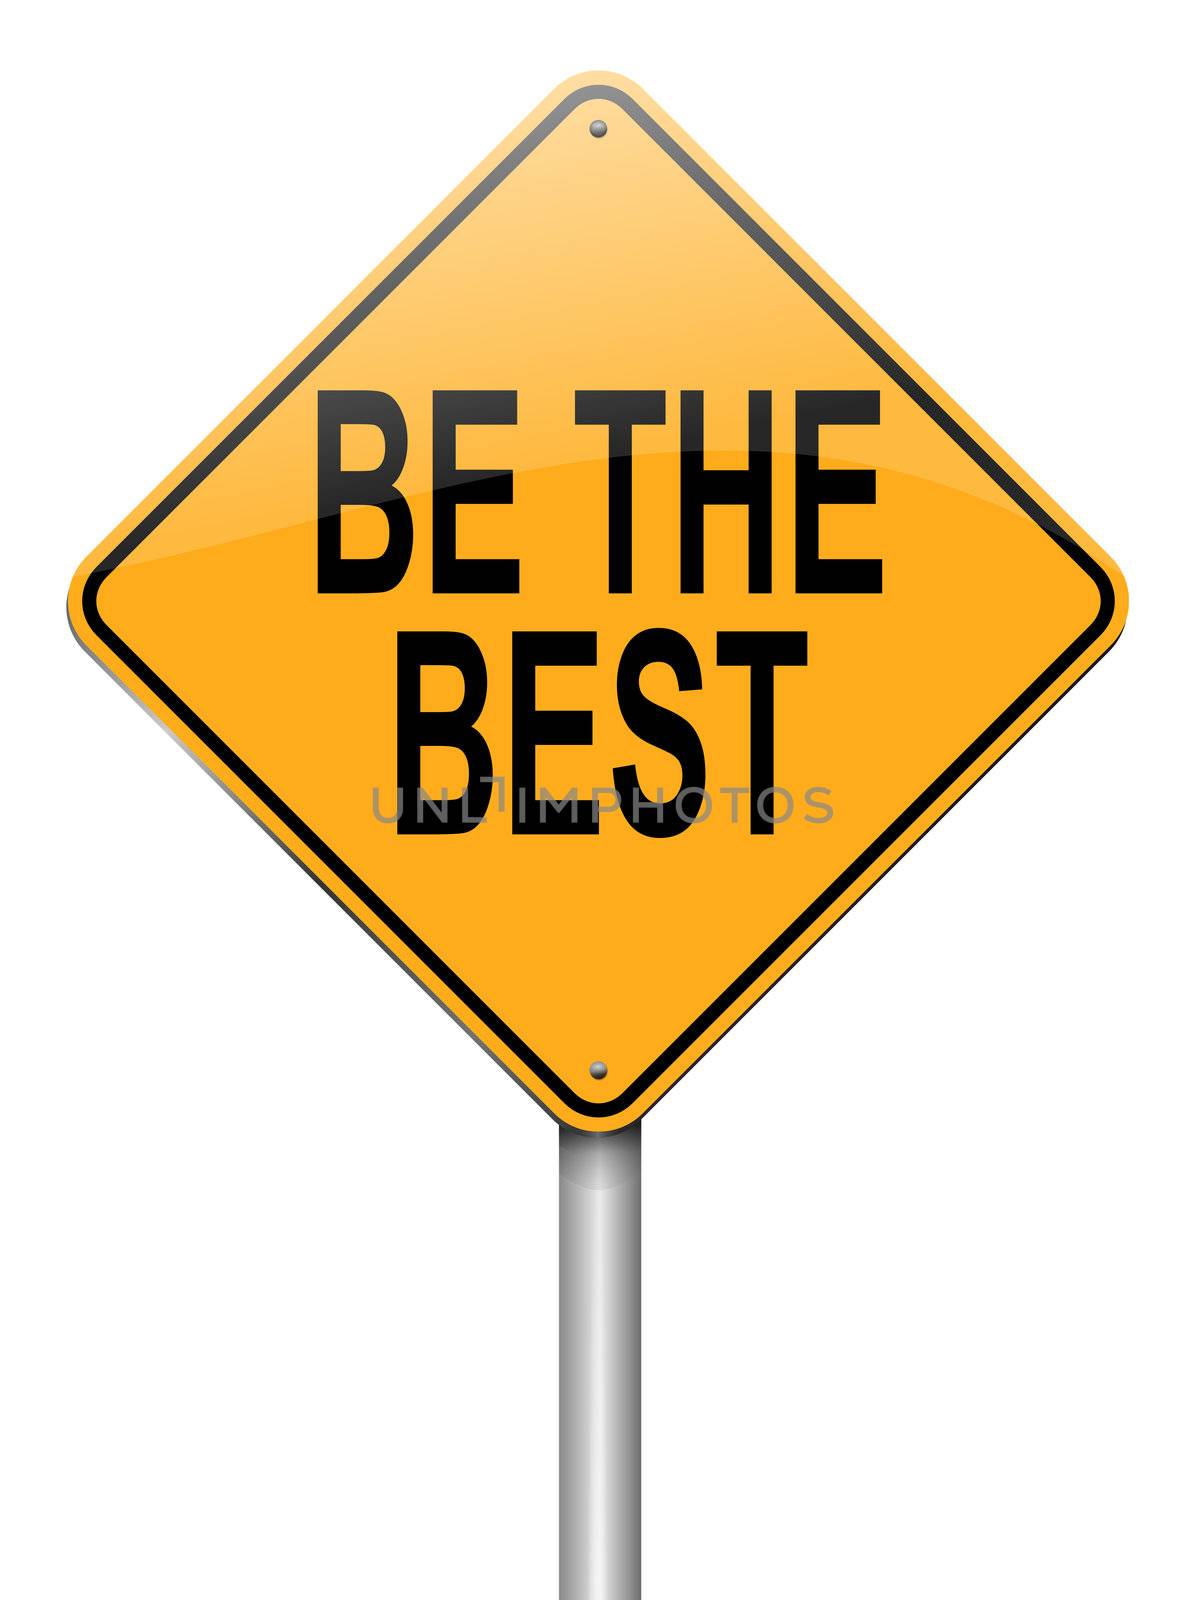 Illustration depicting a roadsign with a be the best concept. White background.